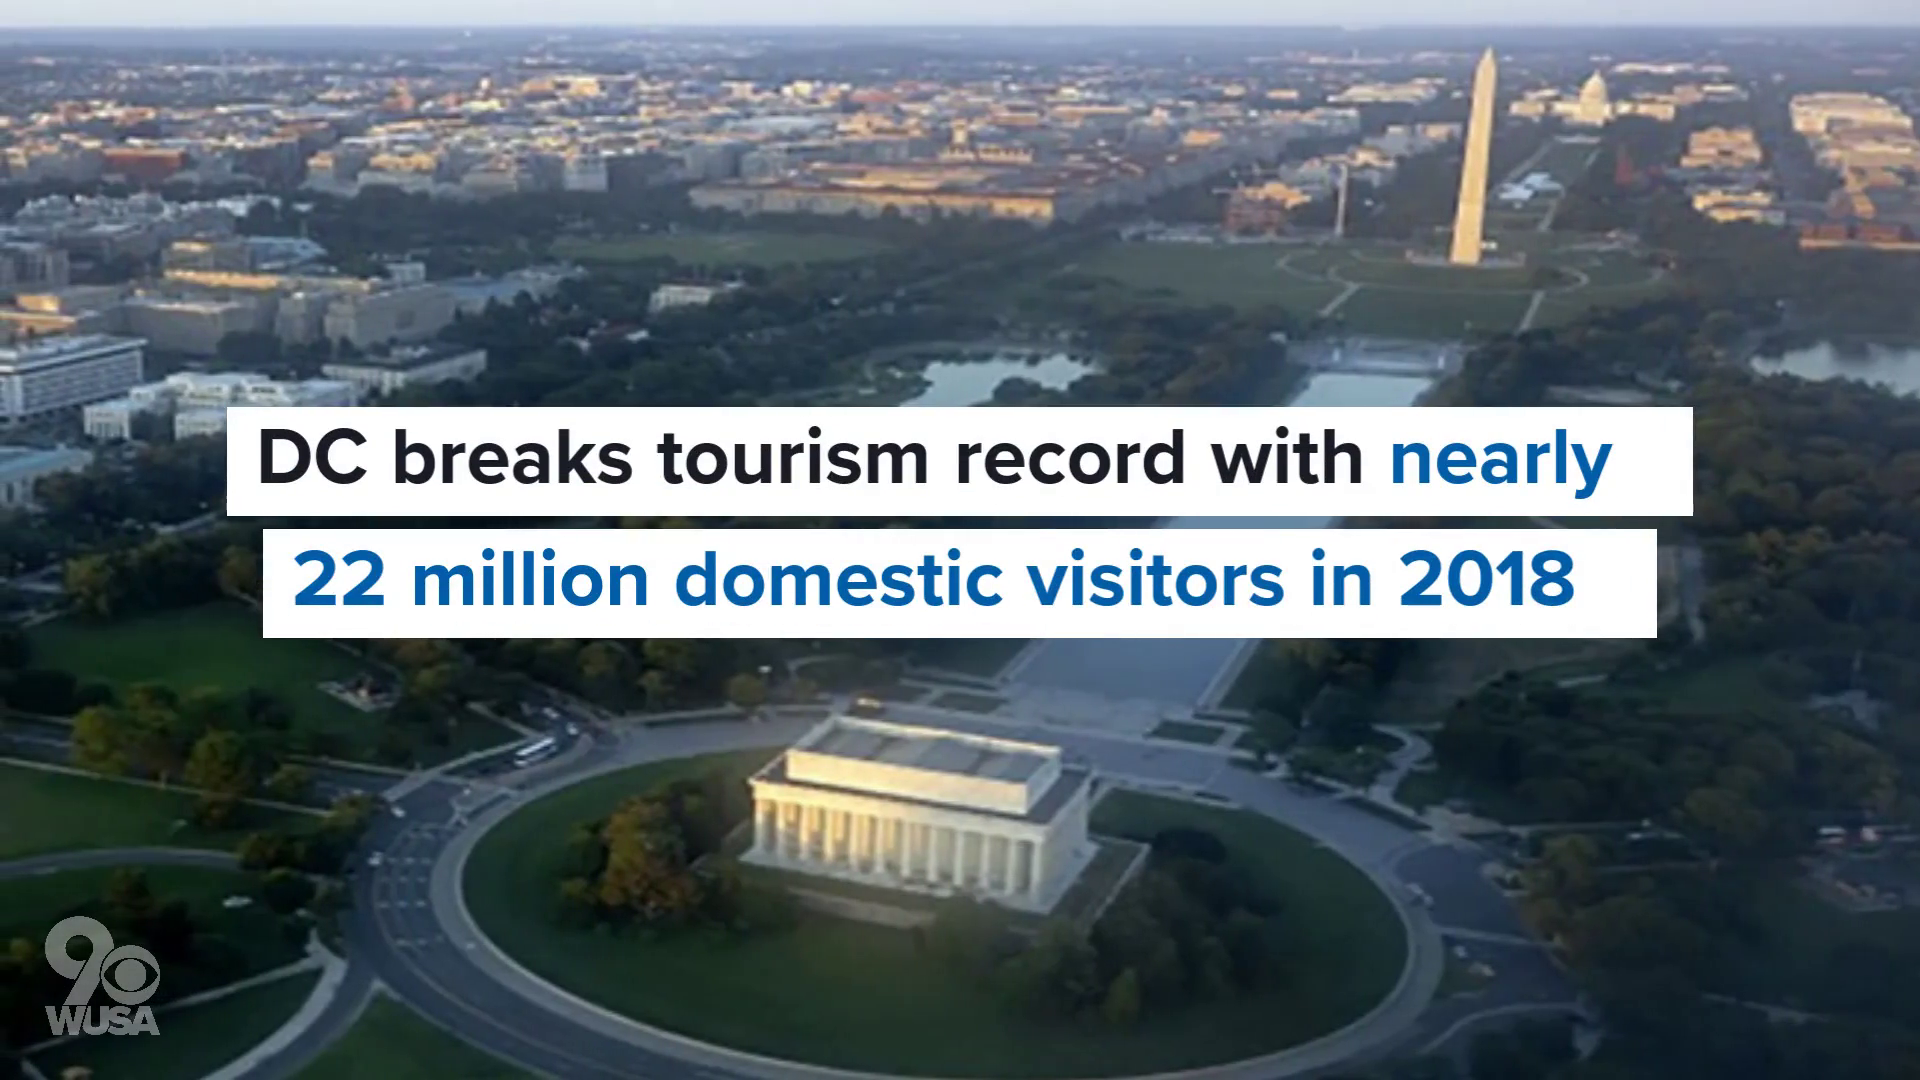 2018 marks 9th consecutive year of increasing tourism in the District.